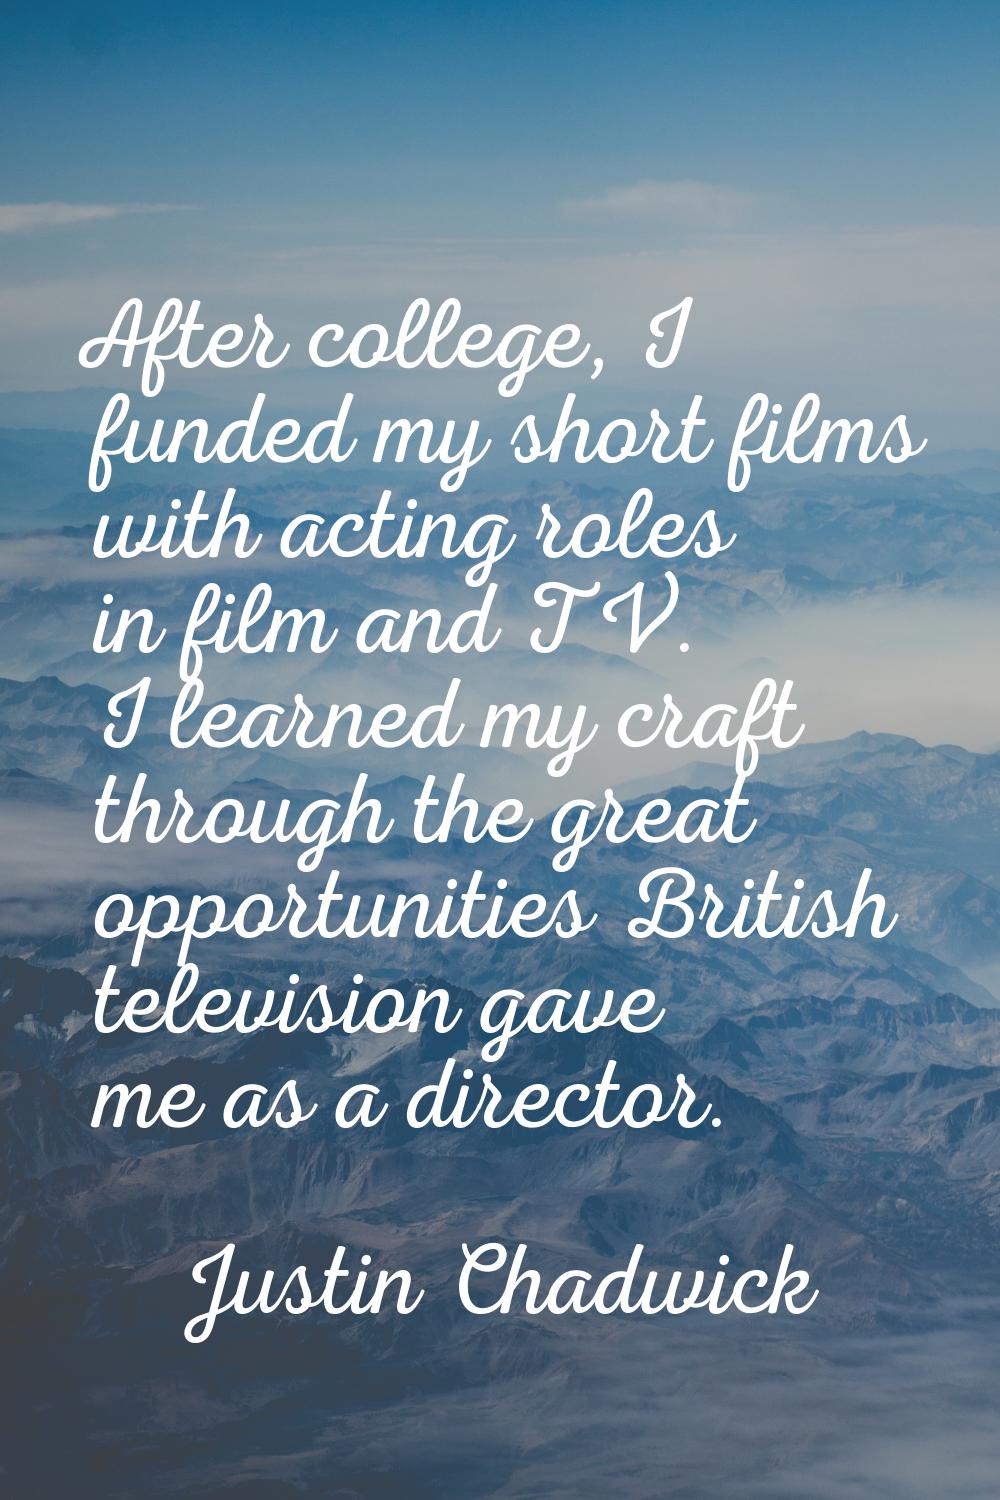 After college, I funded my short films with acting roles in film and TV. I learned my craft through